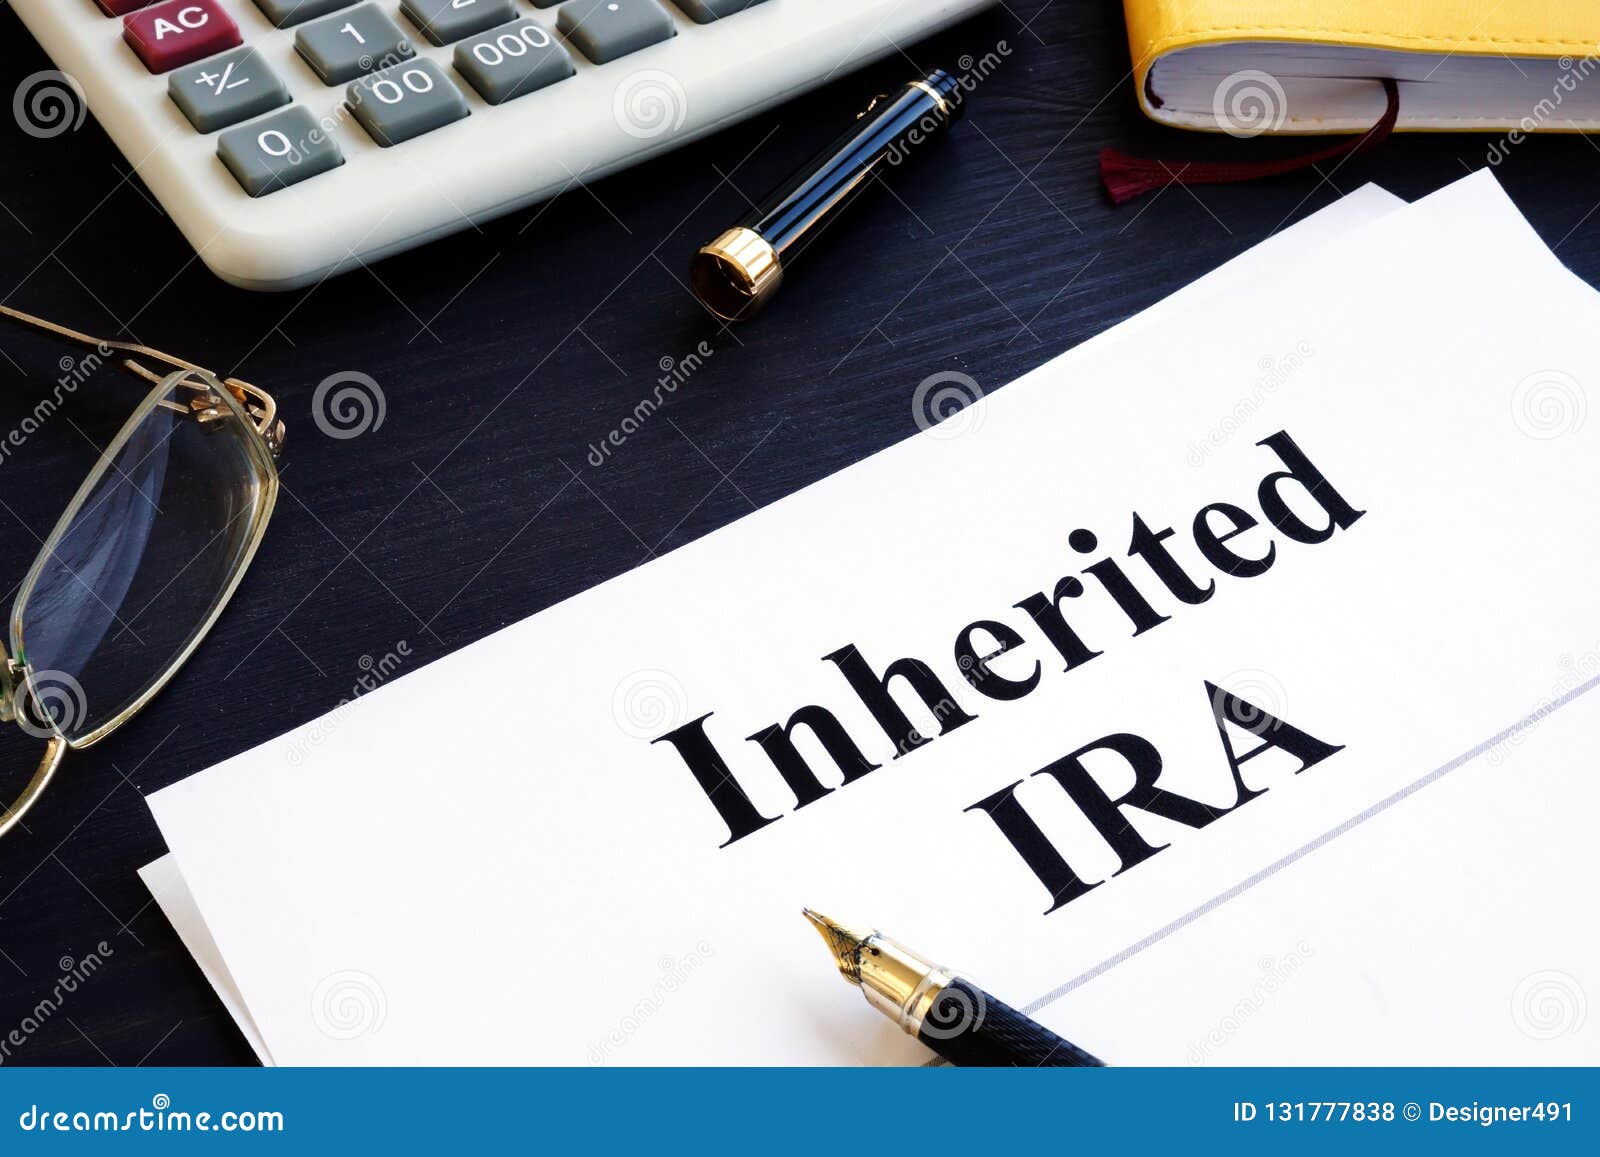 inherited ira documents on a table. retirement plan